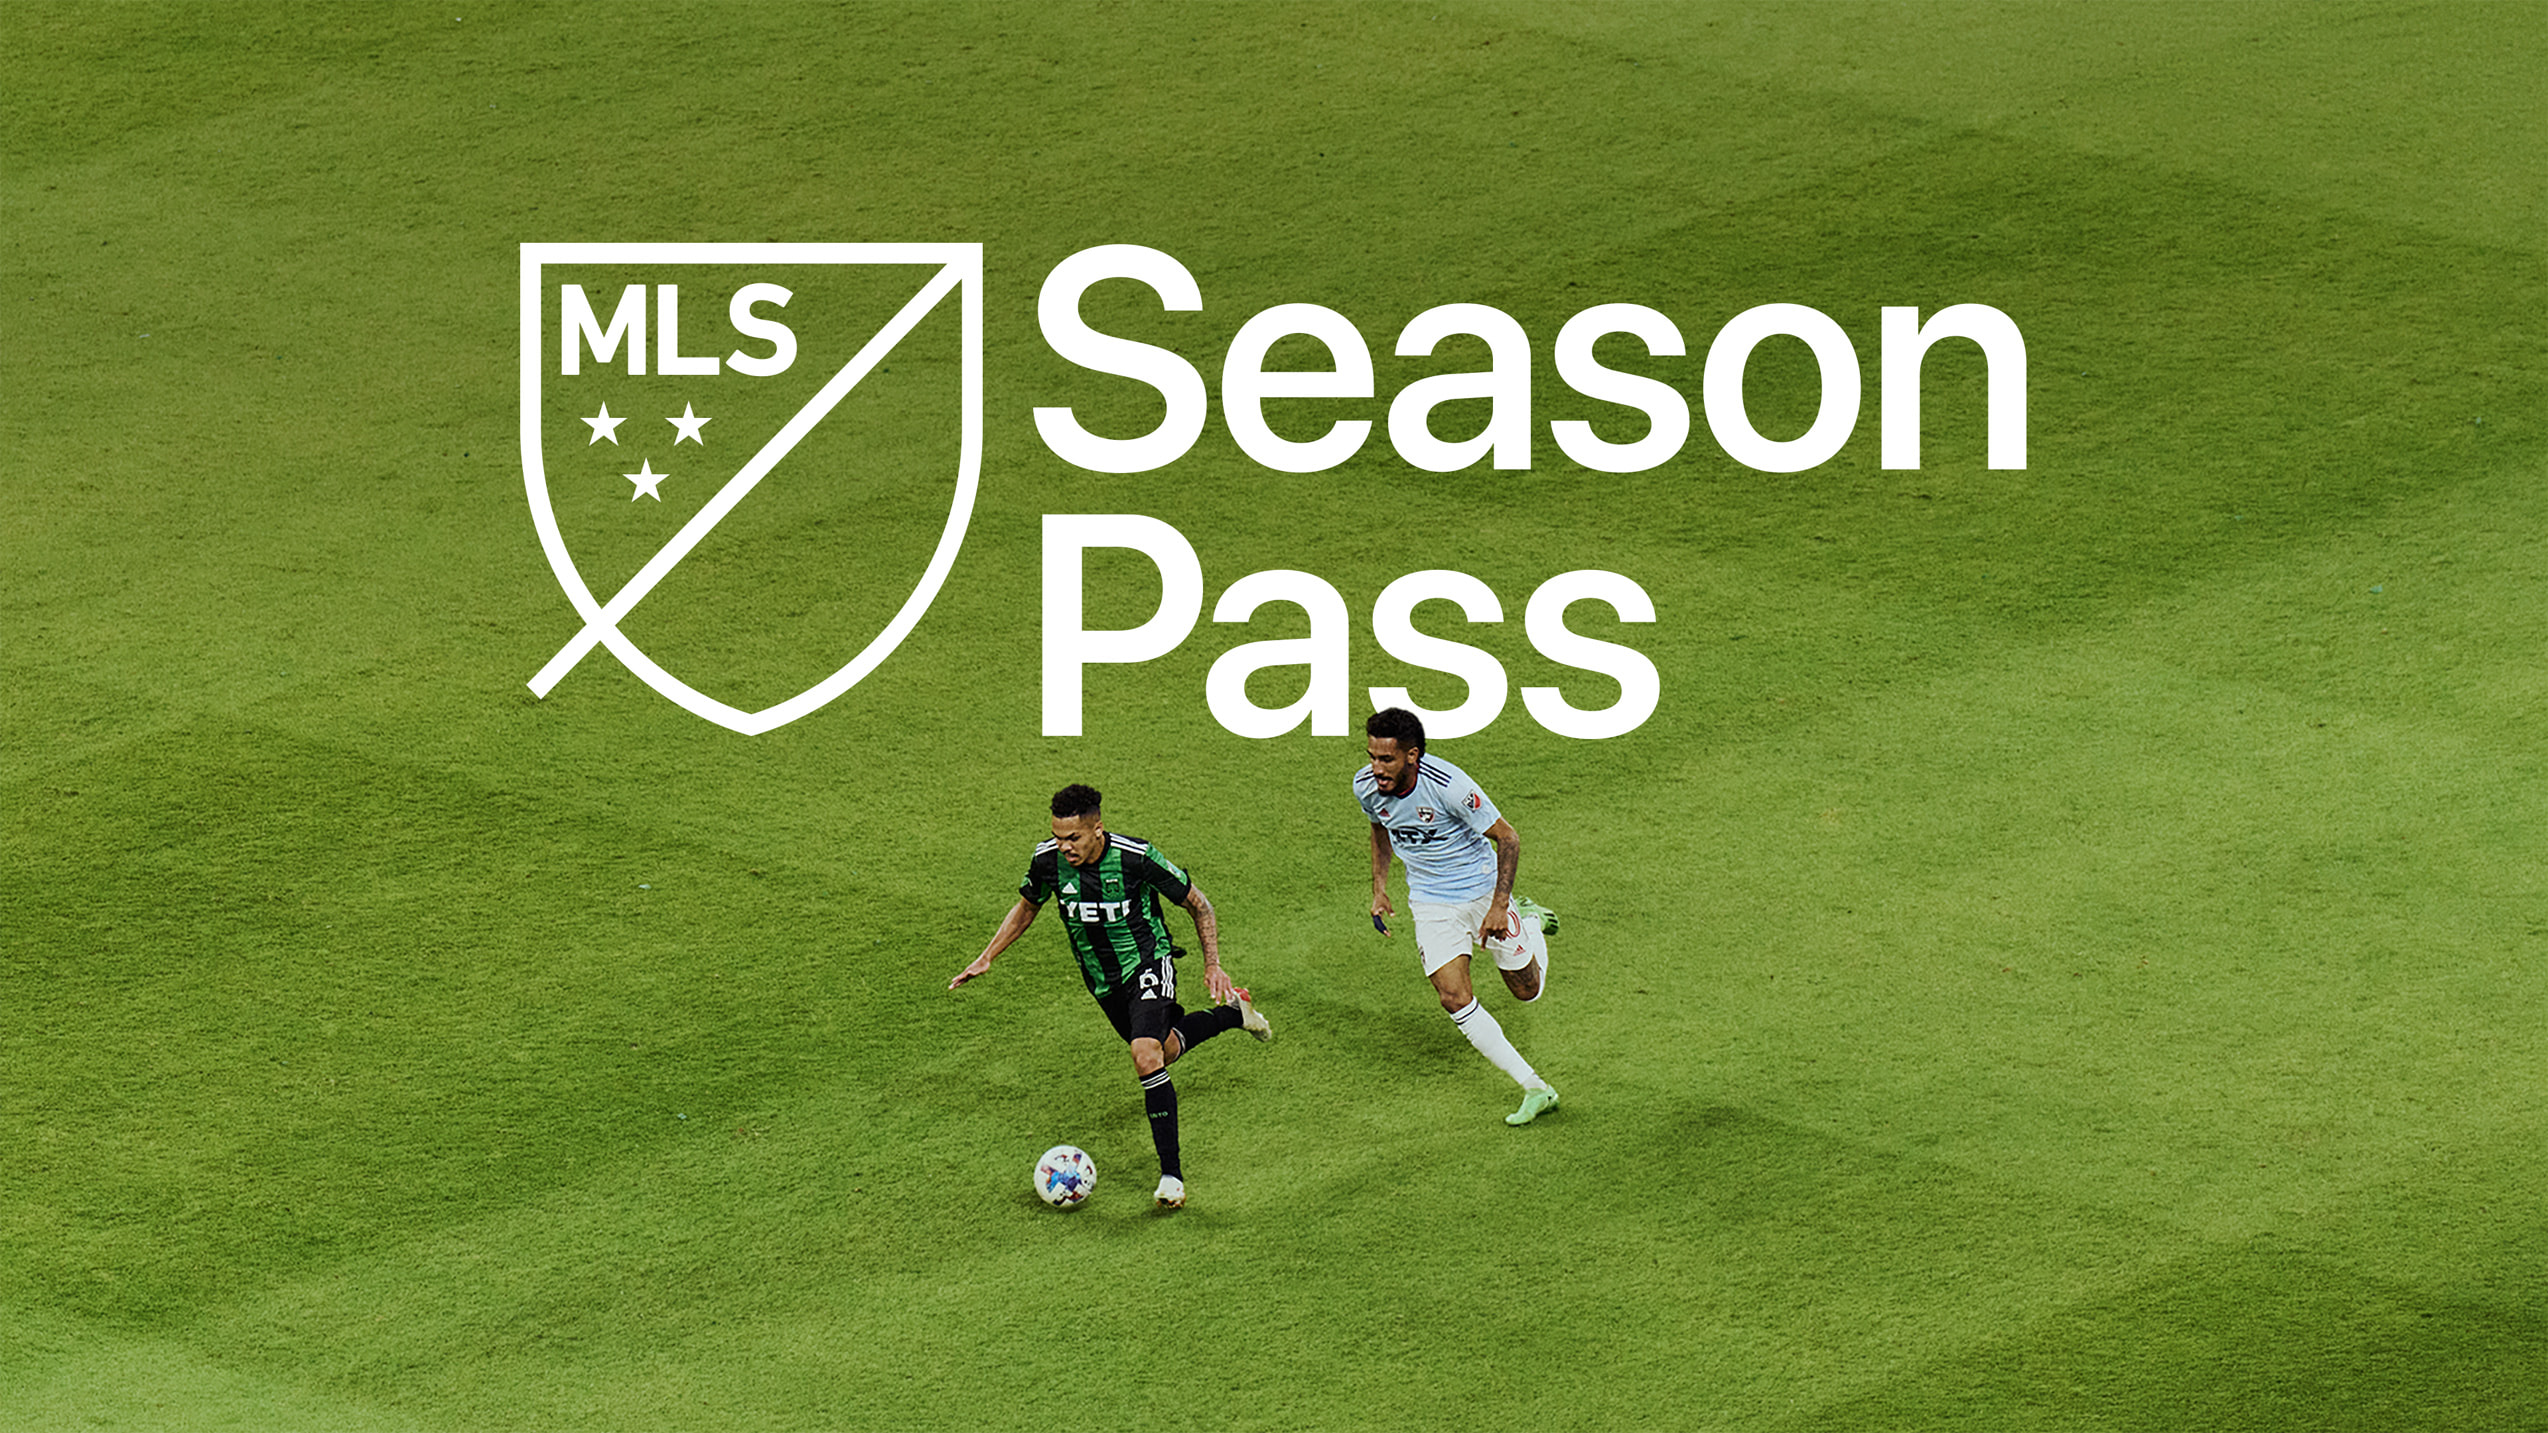 Apple and Major League Soccer unveil broadcasters for MLS Season Pass -  Apple